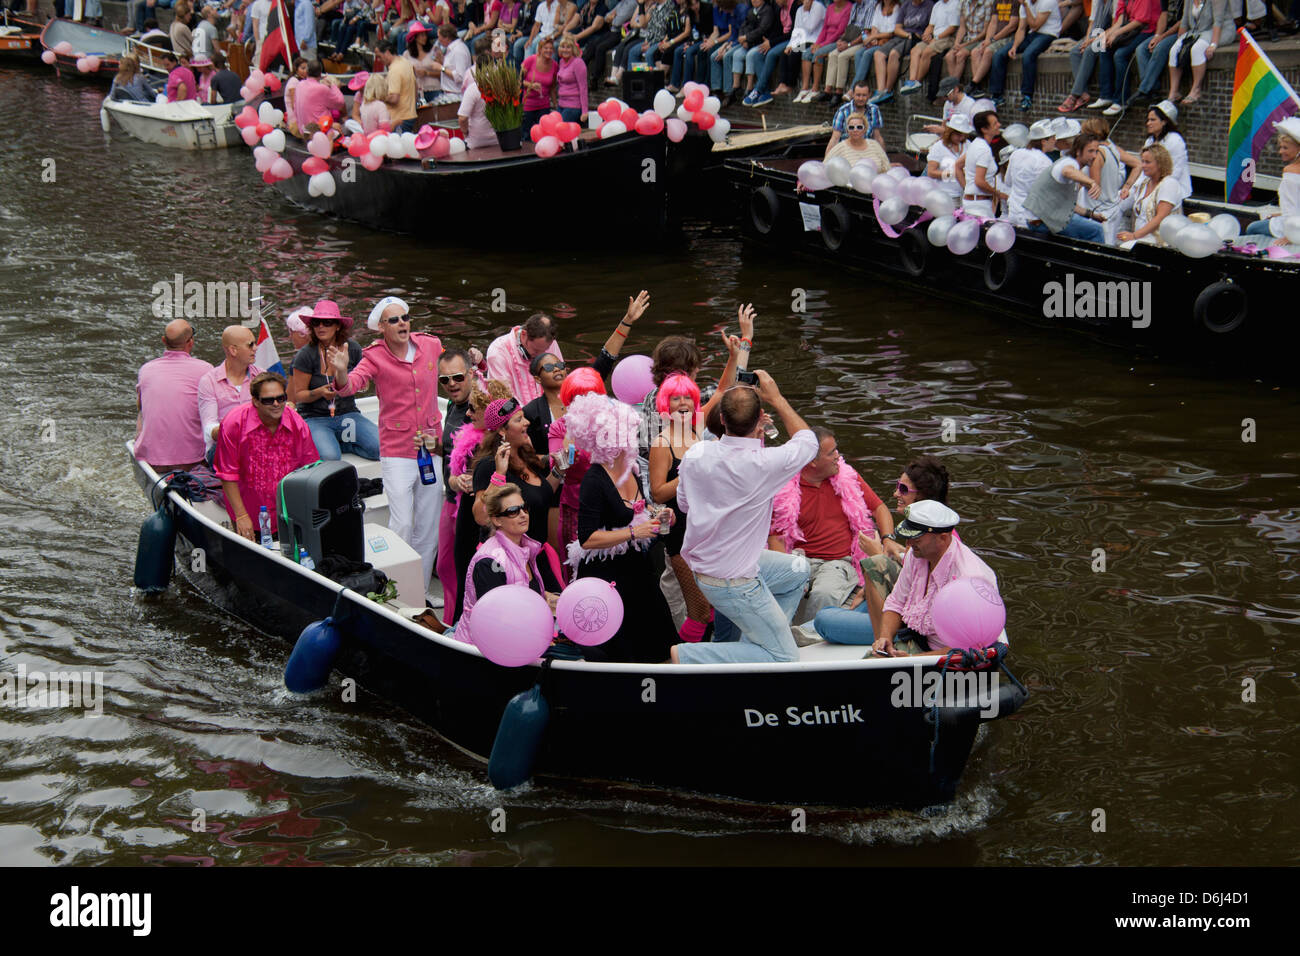 The Gay Pride Parade Down A Crowded Canal Lined With People And Boats In Amsterdam Holland